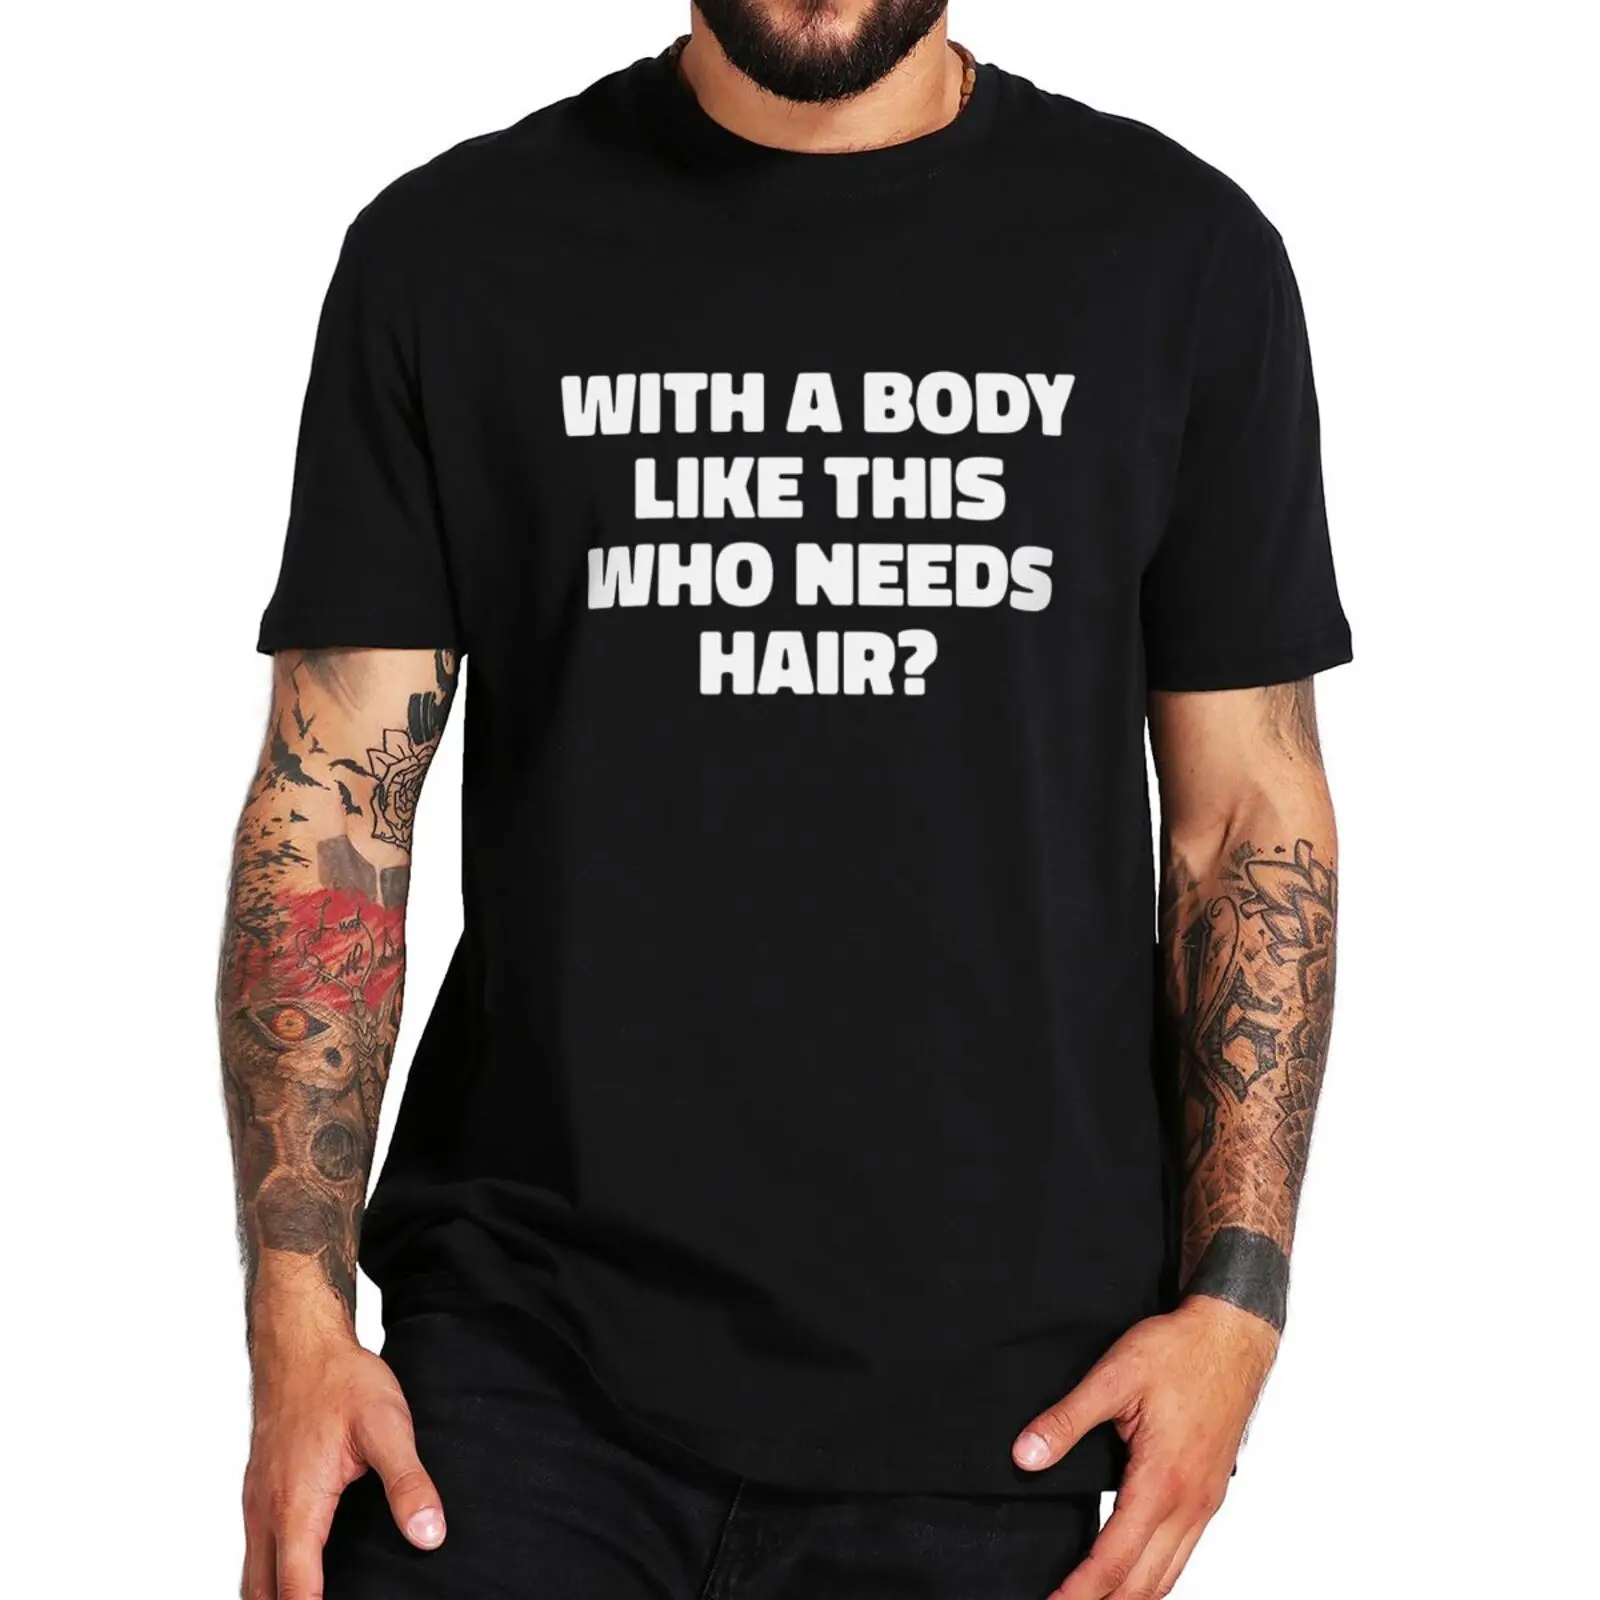 

Balding Dad T Shirt Funny Mens With A Body Like This Who Needs Hair T-shirt EU Size 100% Cotton Tops Tee